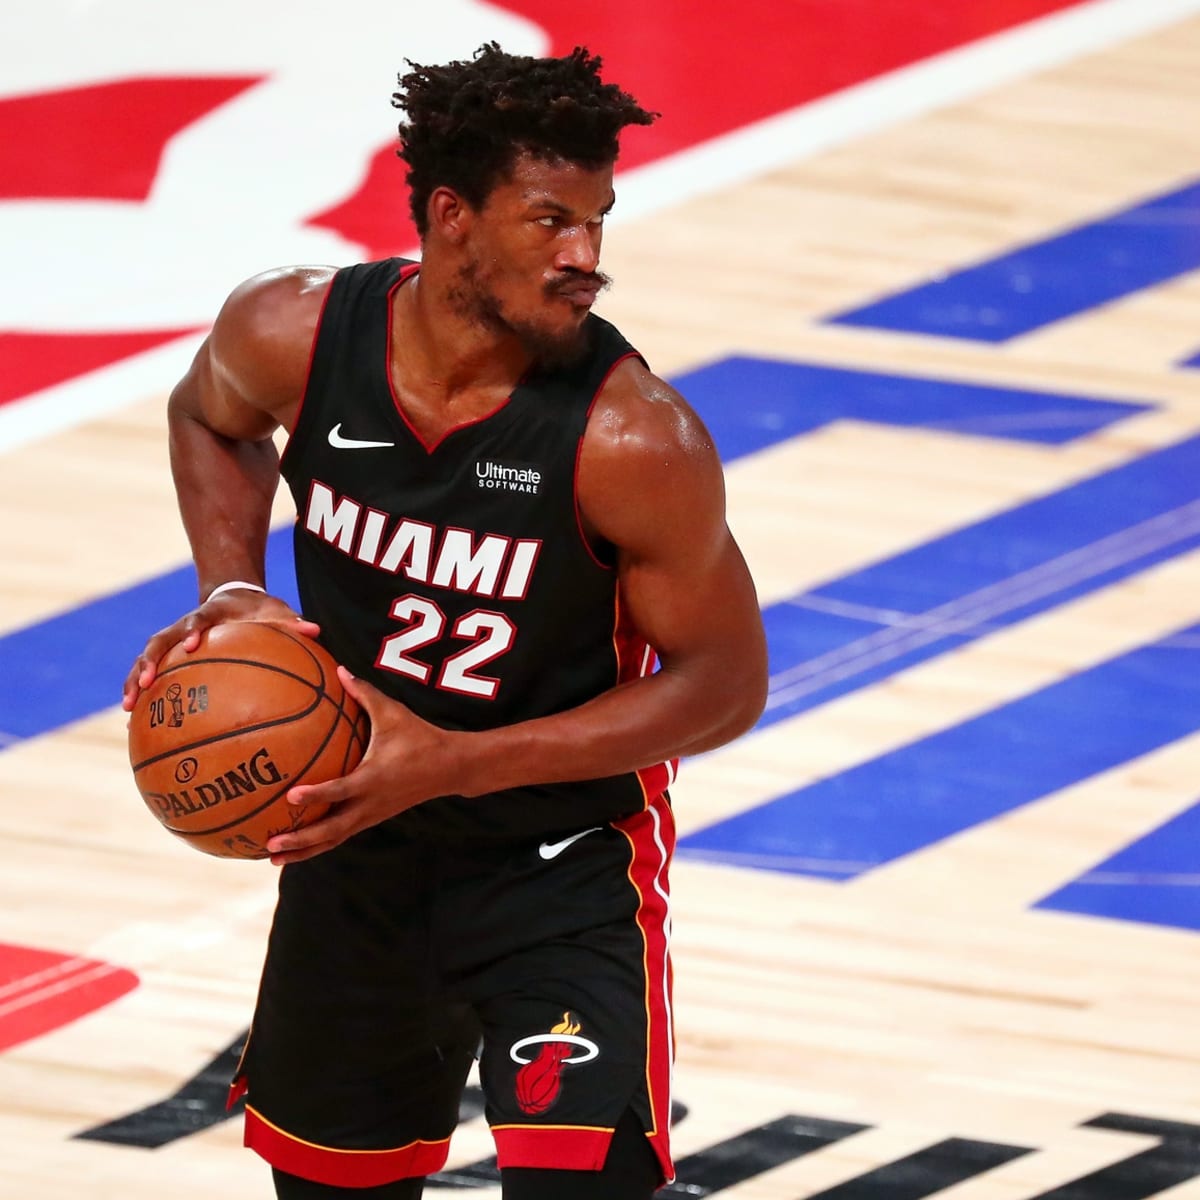 NBA: Jimmy Butler has found his soulmate in Miami, and it's the Heat